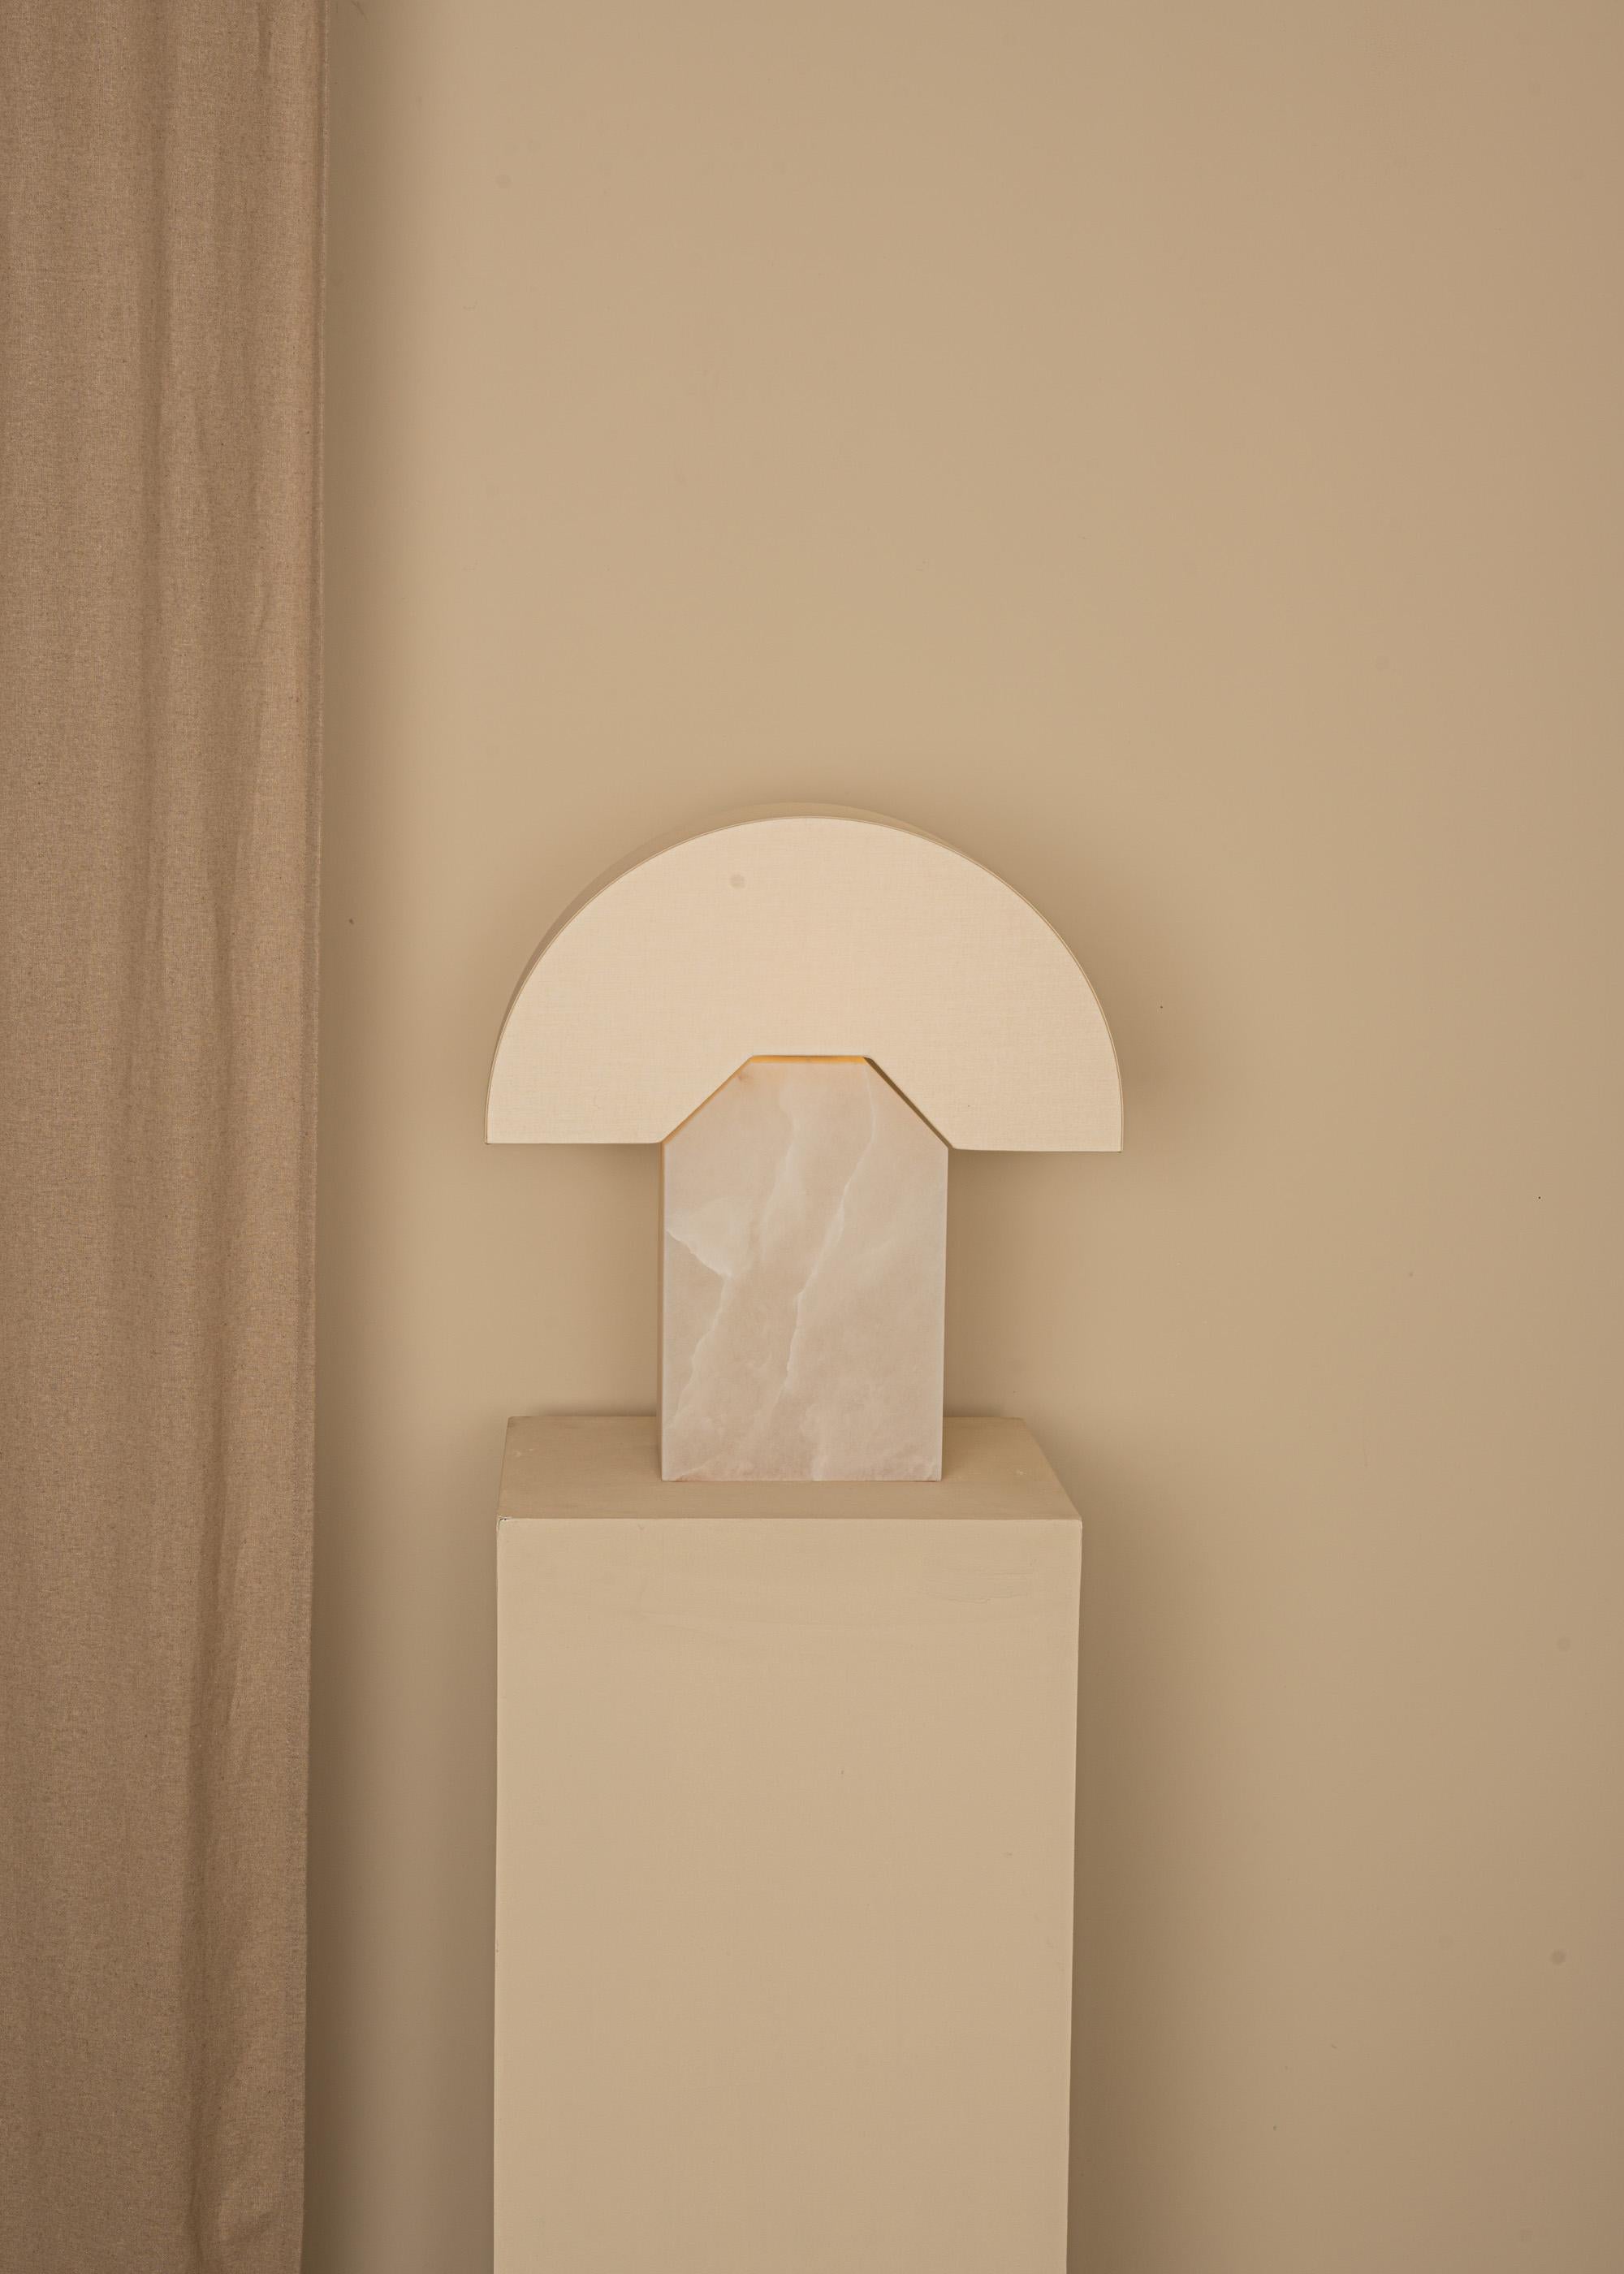 White Alabaster Edna Table Lamp by Simone & MarcelMarcel
Dimensions: D 15 x W 44 x H 46 cm.
Materials: Cotton, brass and white alabaster.

Also available in different marbles and ceramics. Custom options available on request. Please contact us.